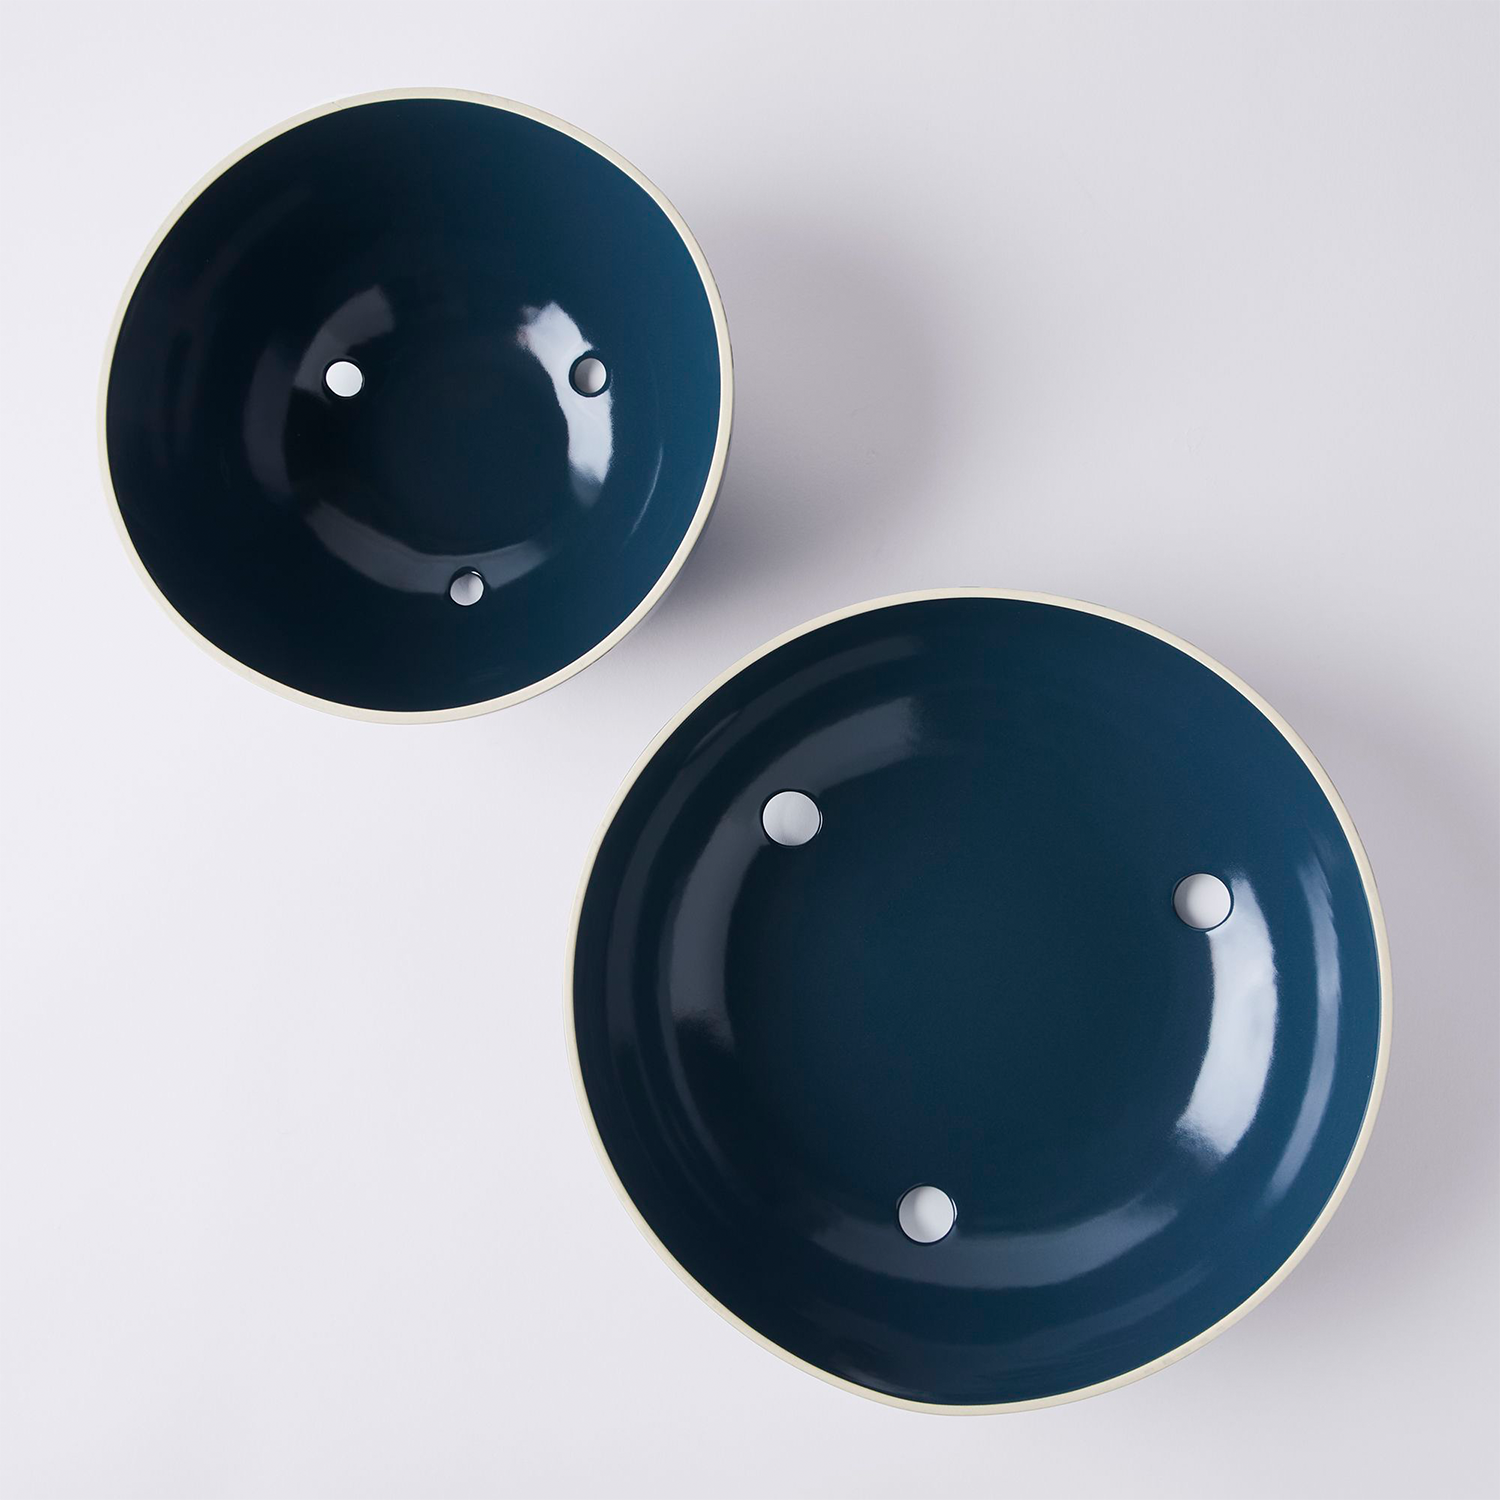 shallow and deep blue fruit bowls